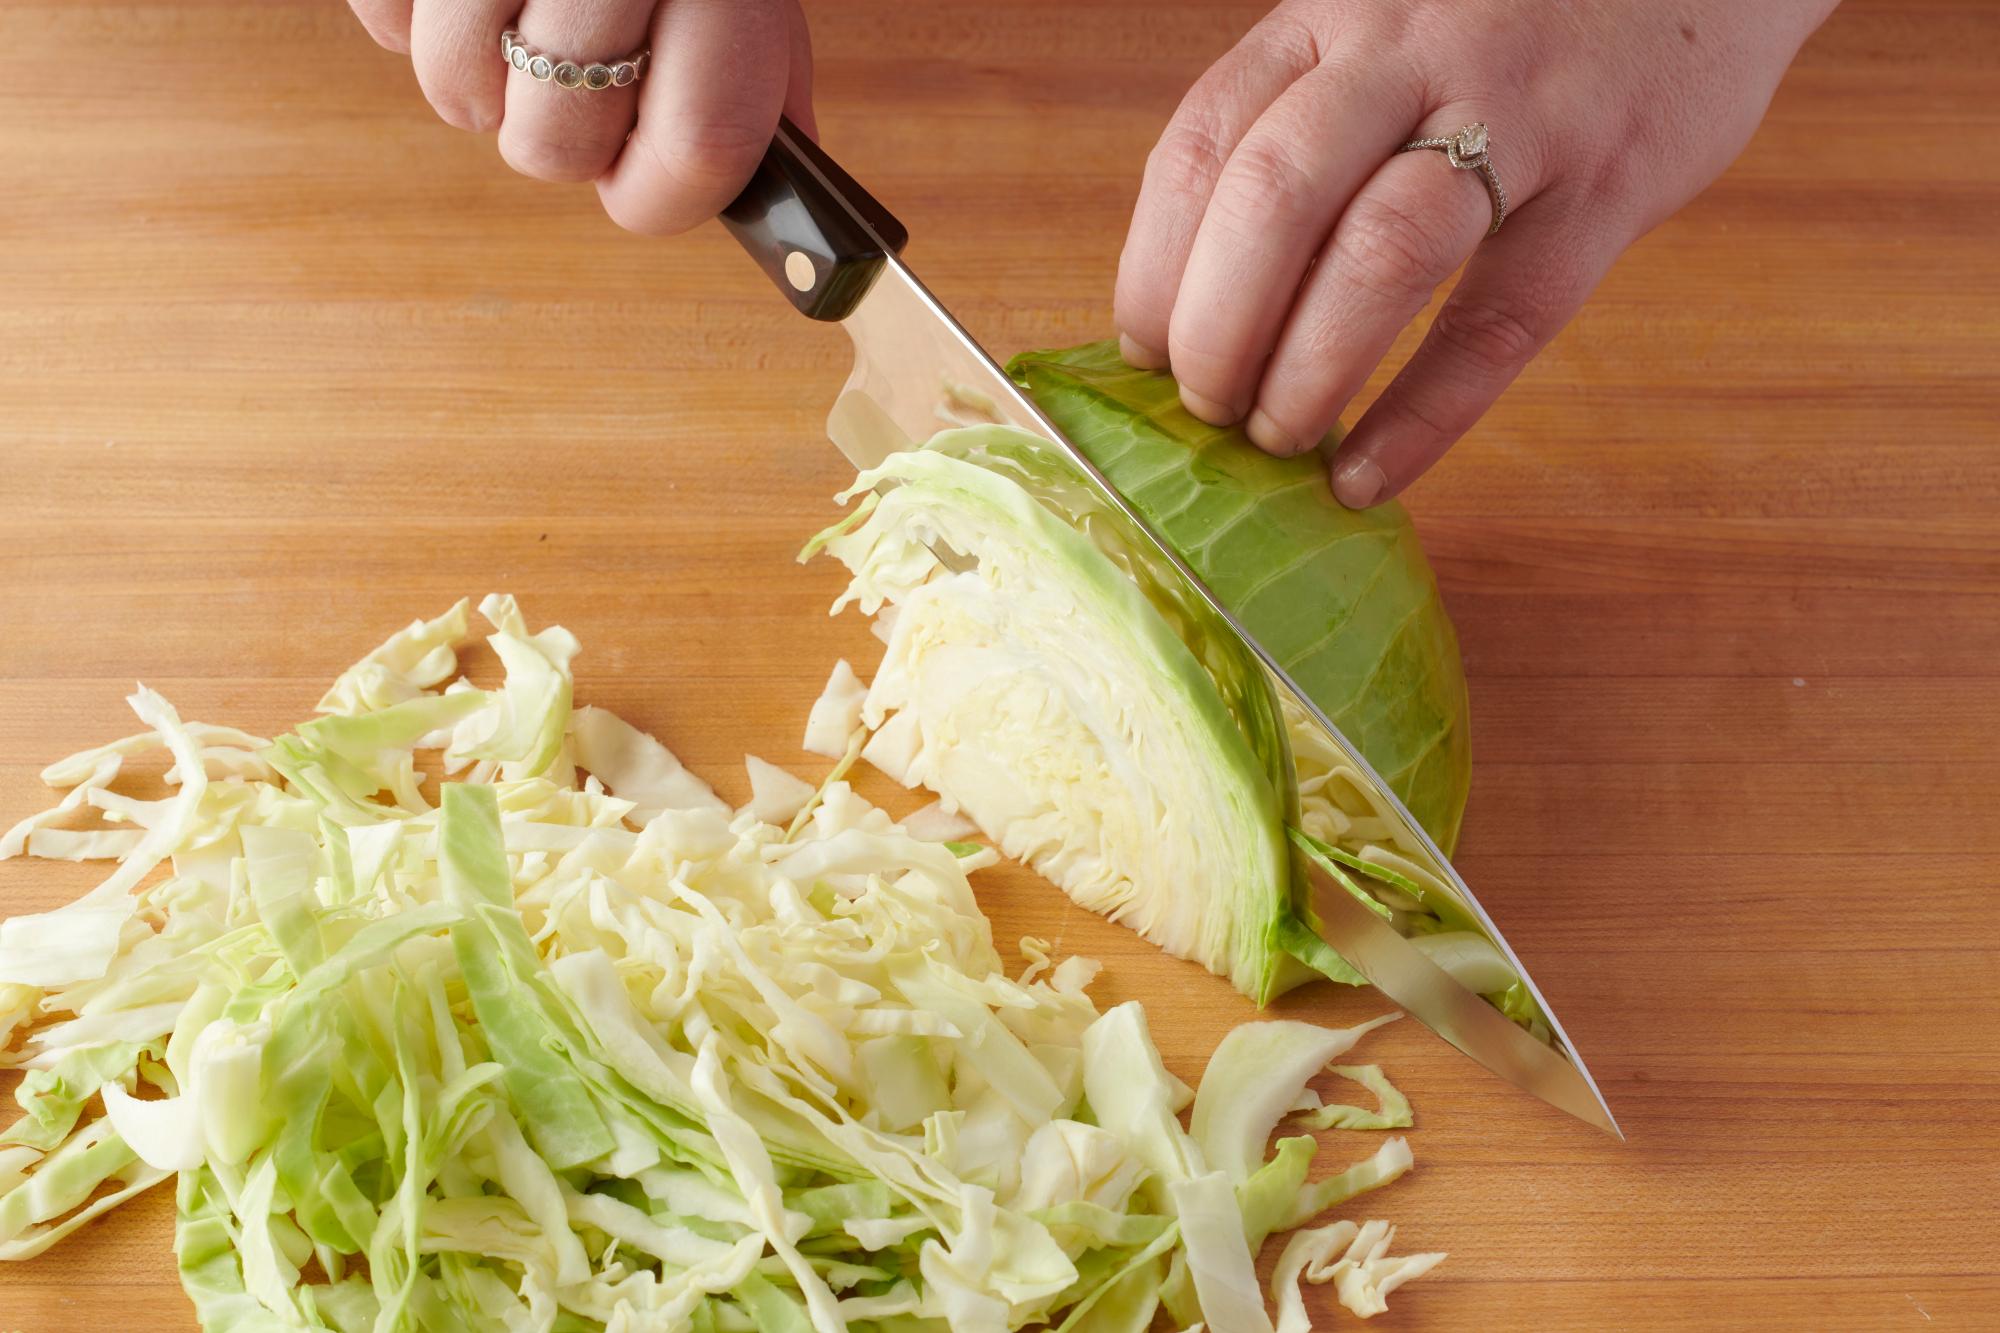 Rough chopping cabbage with a Petite Chef.